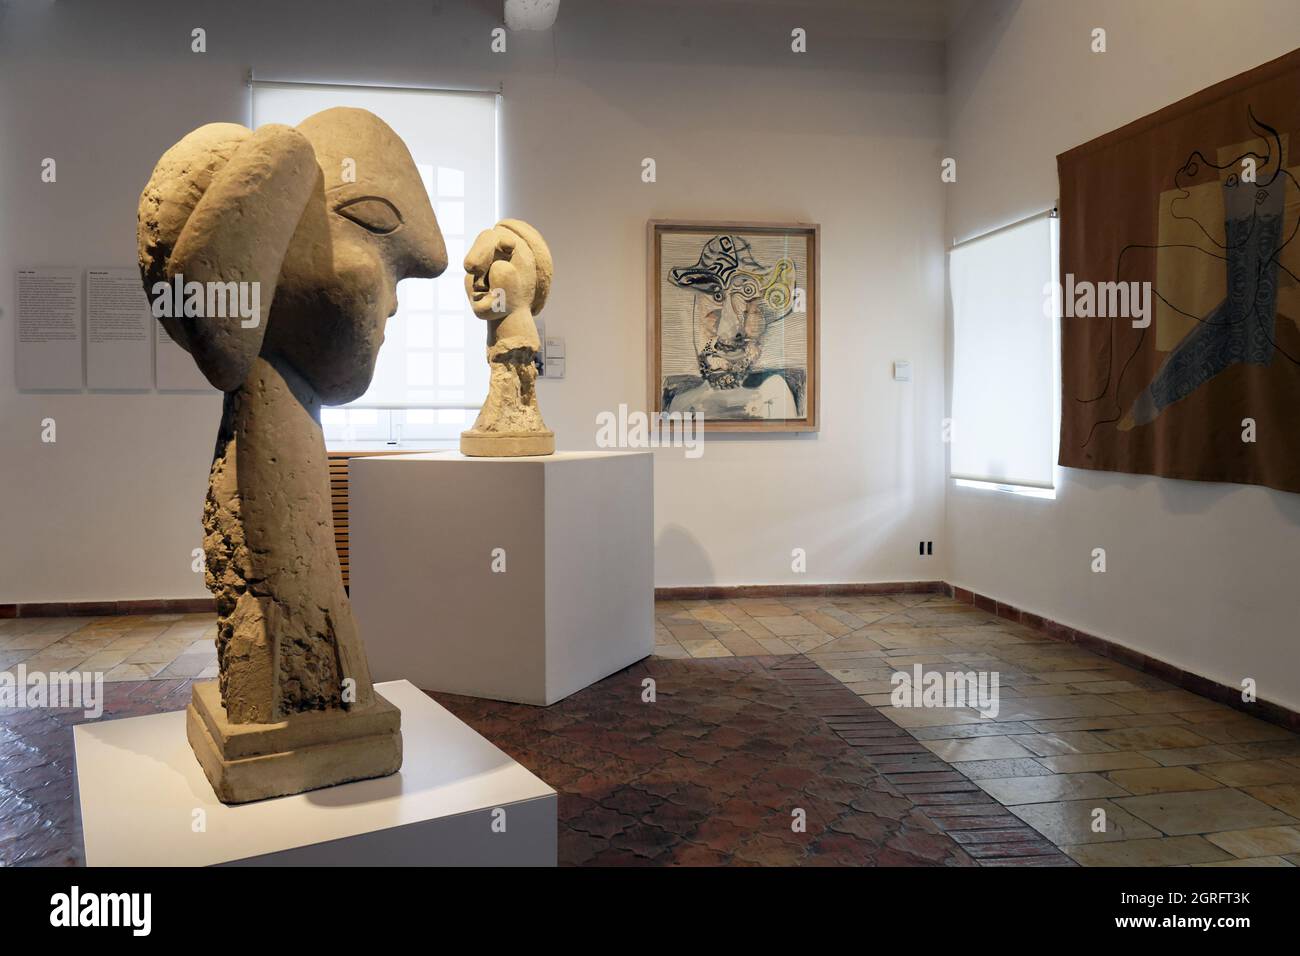 France, Alpes Maritimes, Antibes, old town, Picasso Museum, permanent exhibition of works by Pablo Picasso, sculpture of a lady's head with chignon and lady's head with big eyes and painting of a Bust of a man with a hat Stock Photo